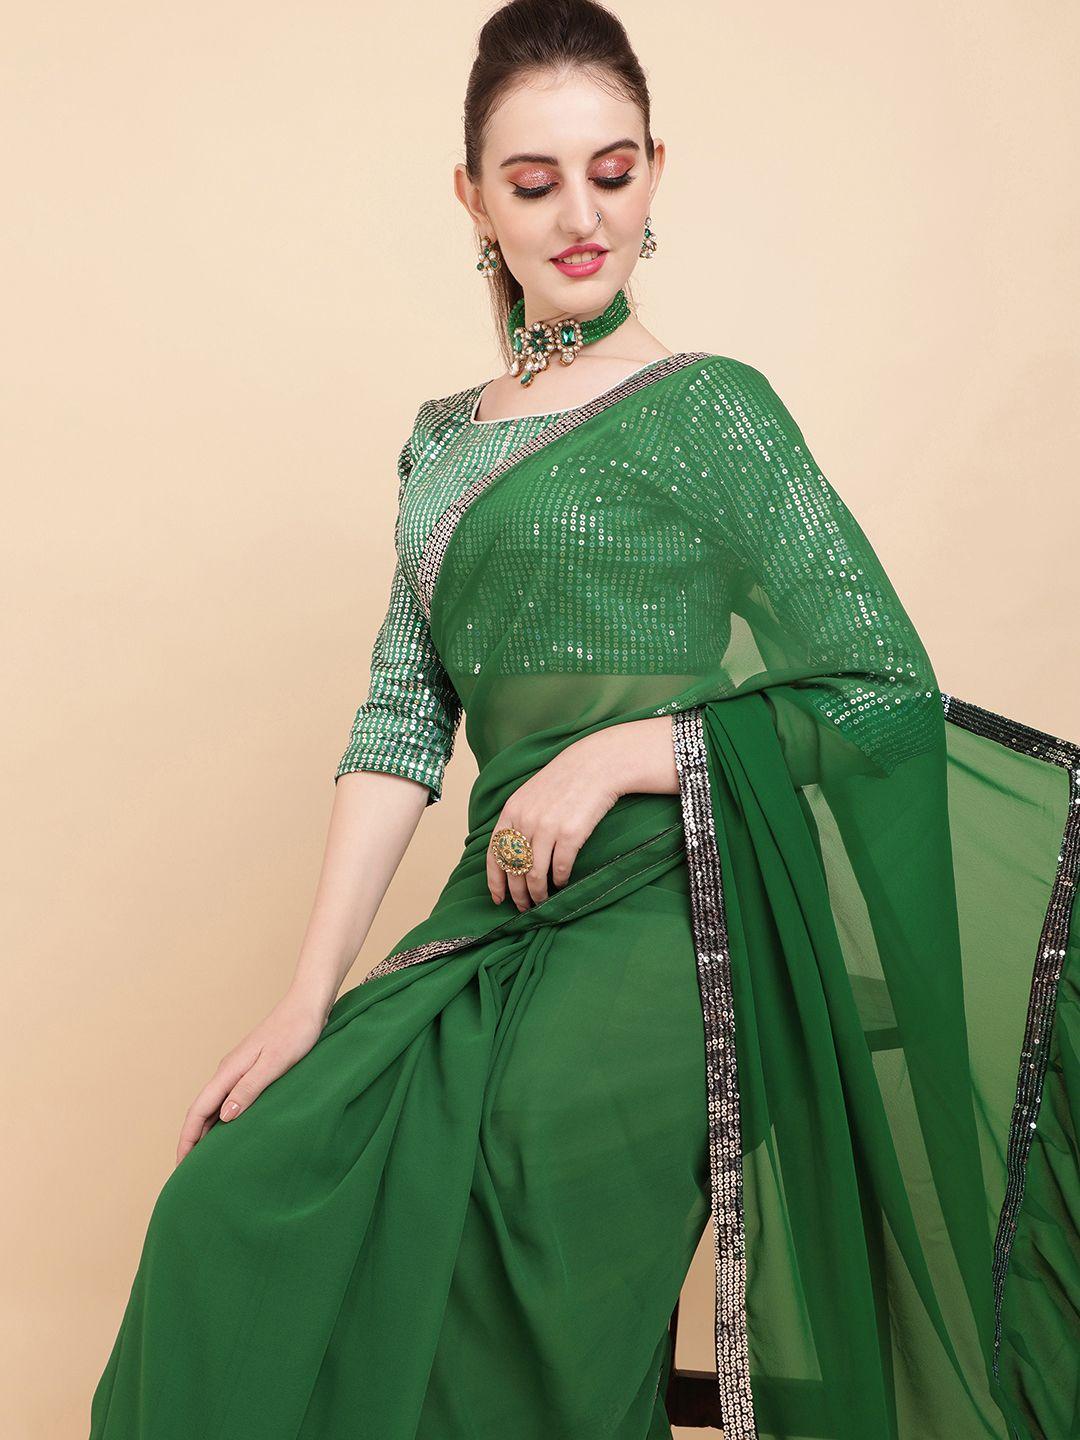 sangria olive green & silver-toned sequinned ruffled saree